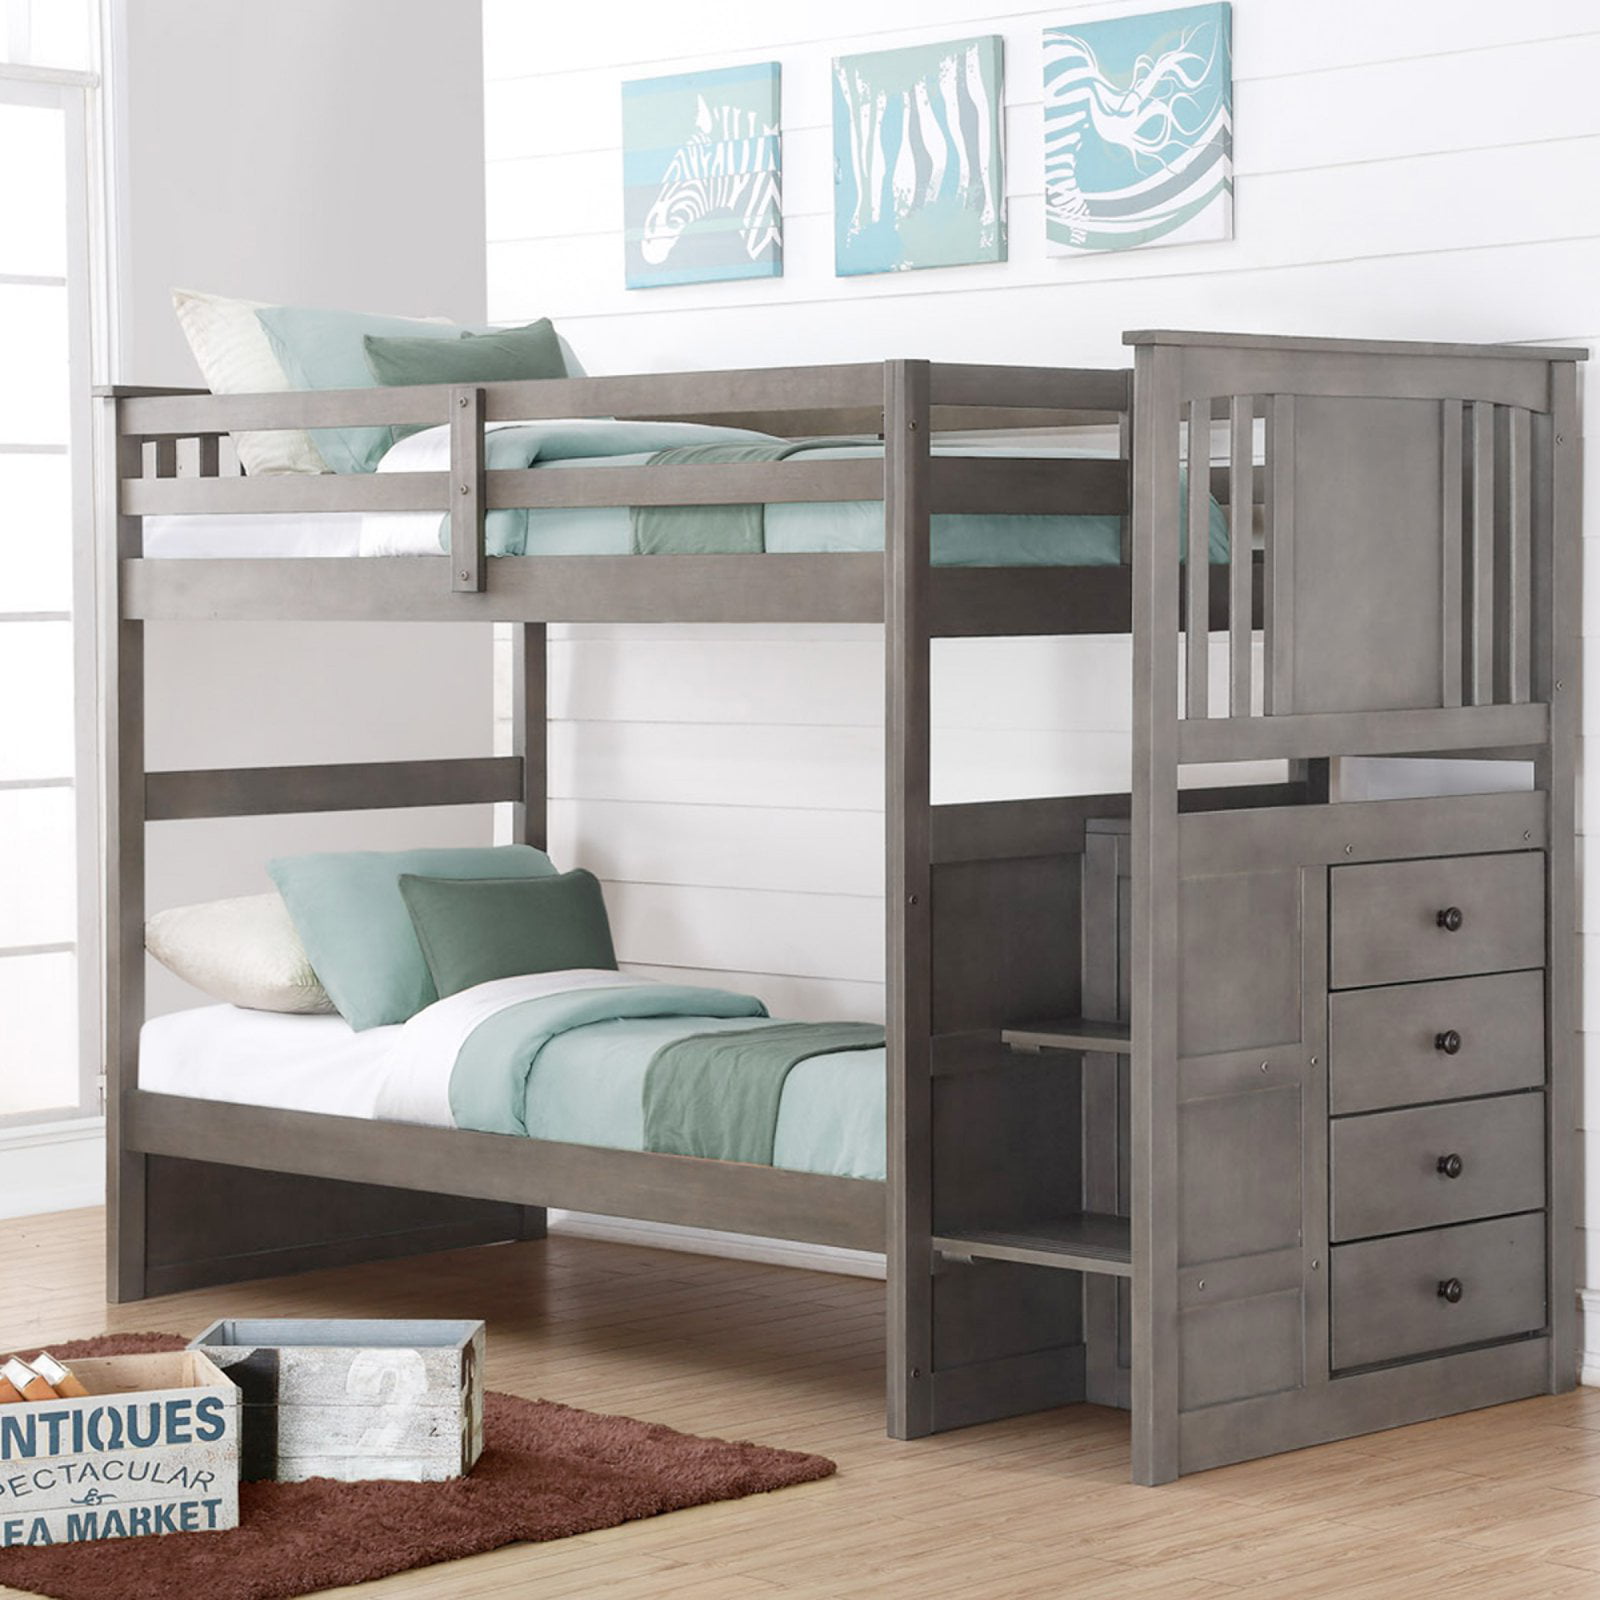 Donco Kids Twin Over Stairway Bunk, Grey Bunk Bed With Stairs